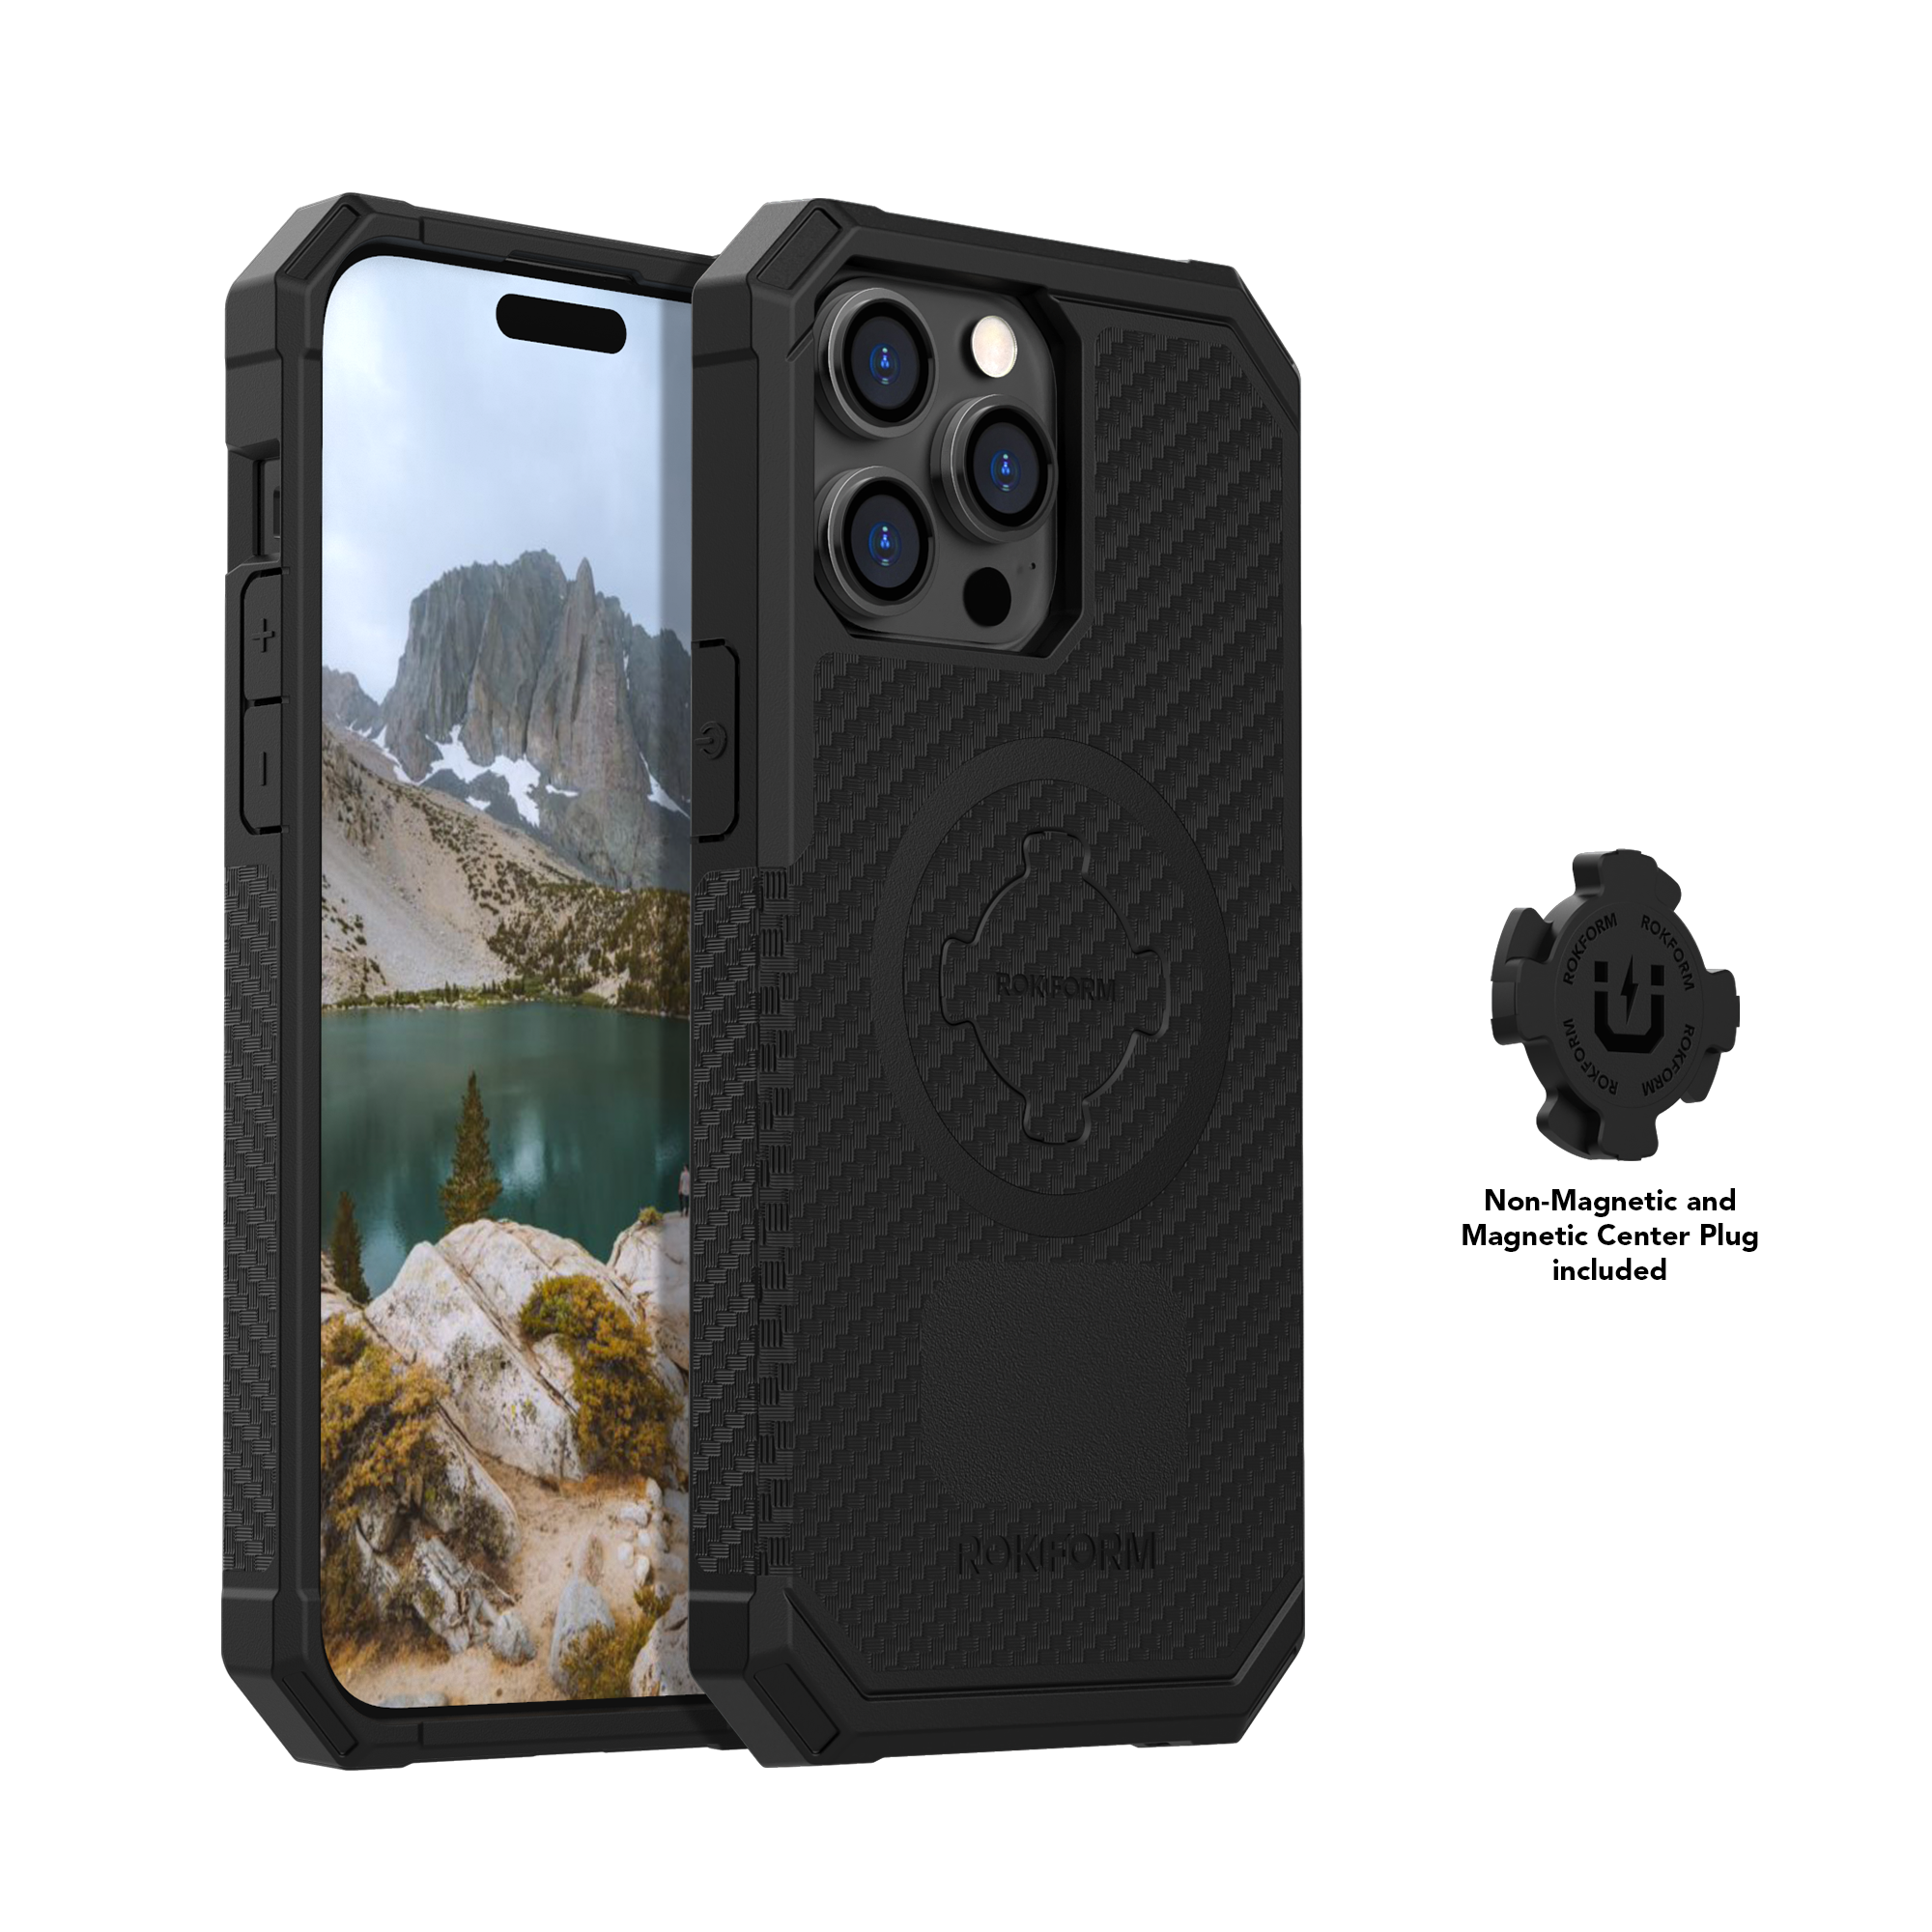 TECH CIRCLE Case for iPhone 11 (6.1 Inch) - [Compatible with MagSafe  Charger] Lightweight Stylish Clear Back Cover Case, Black